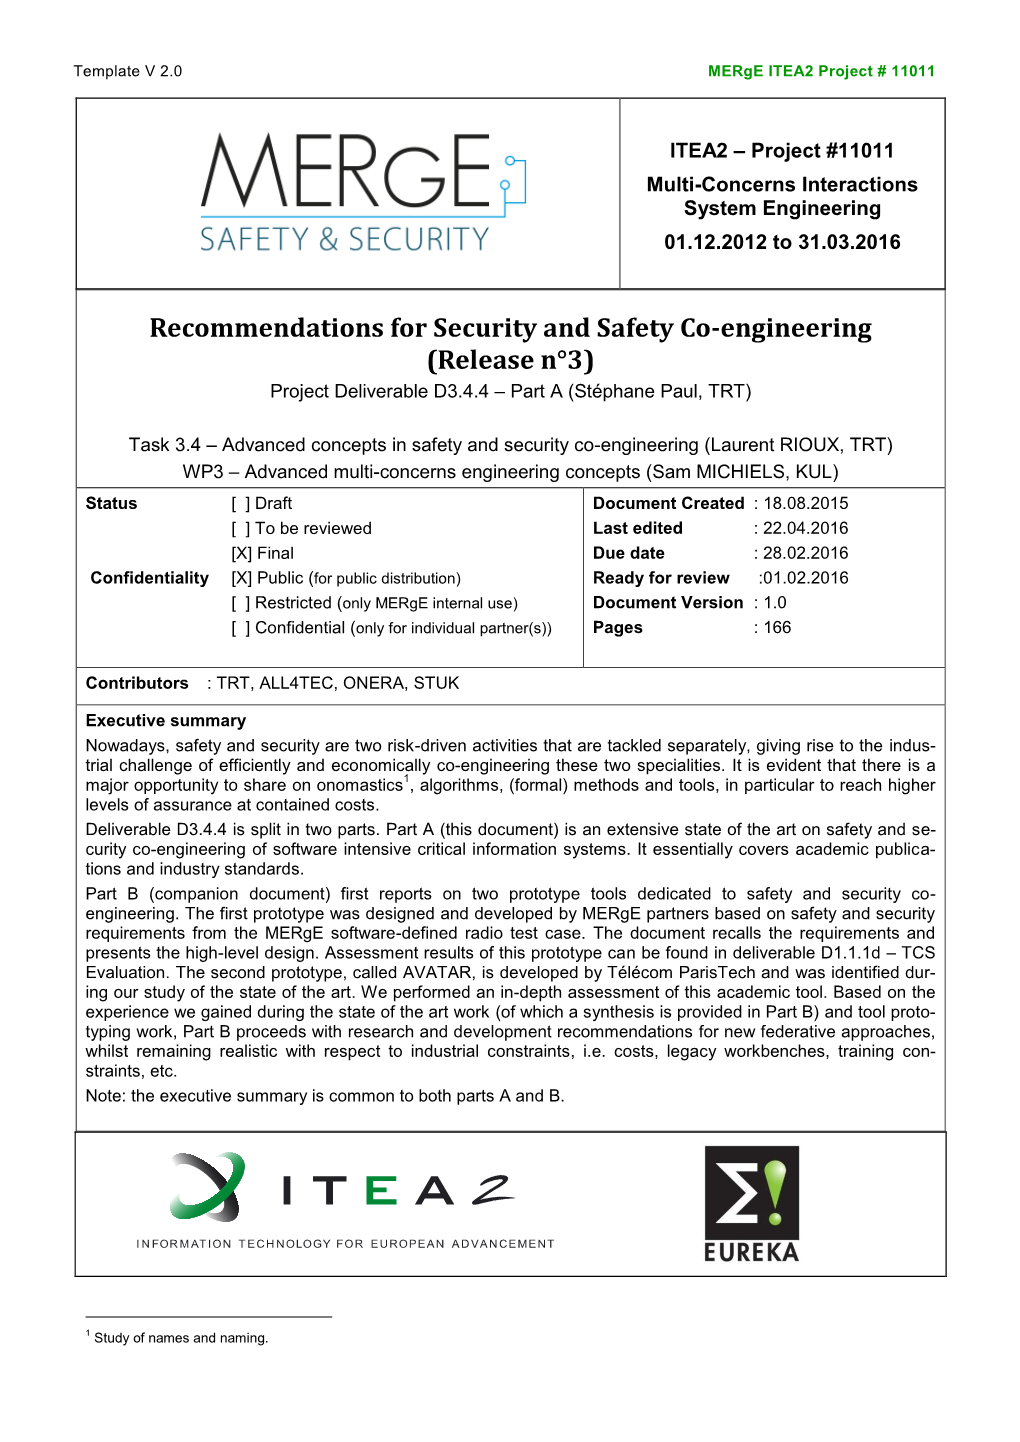 Recommendations for Security and Safety Co-Engineering Merge ITEA2 Project # 11011